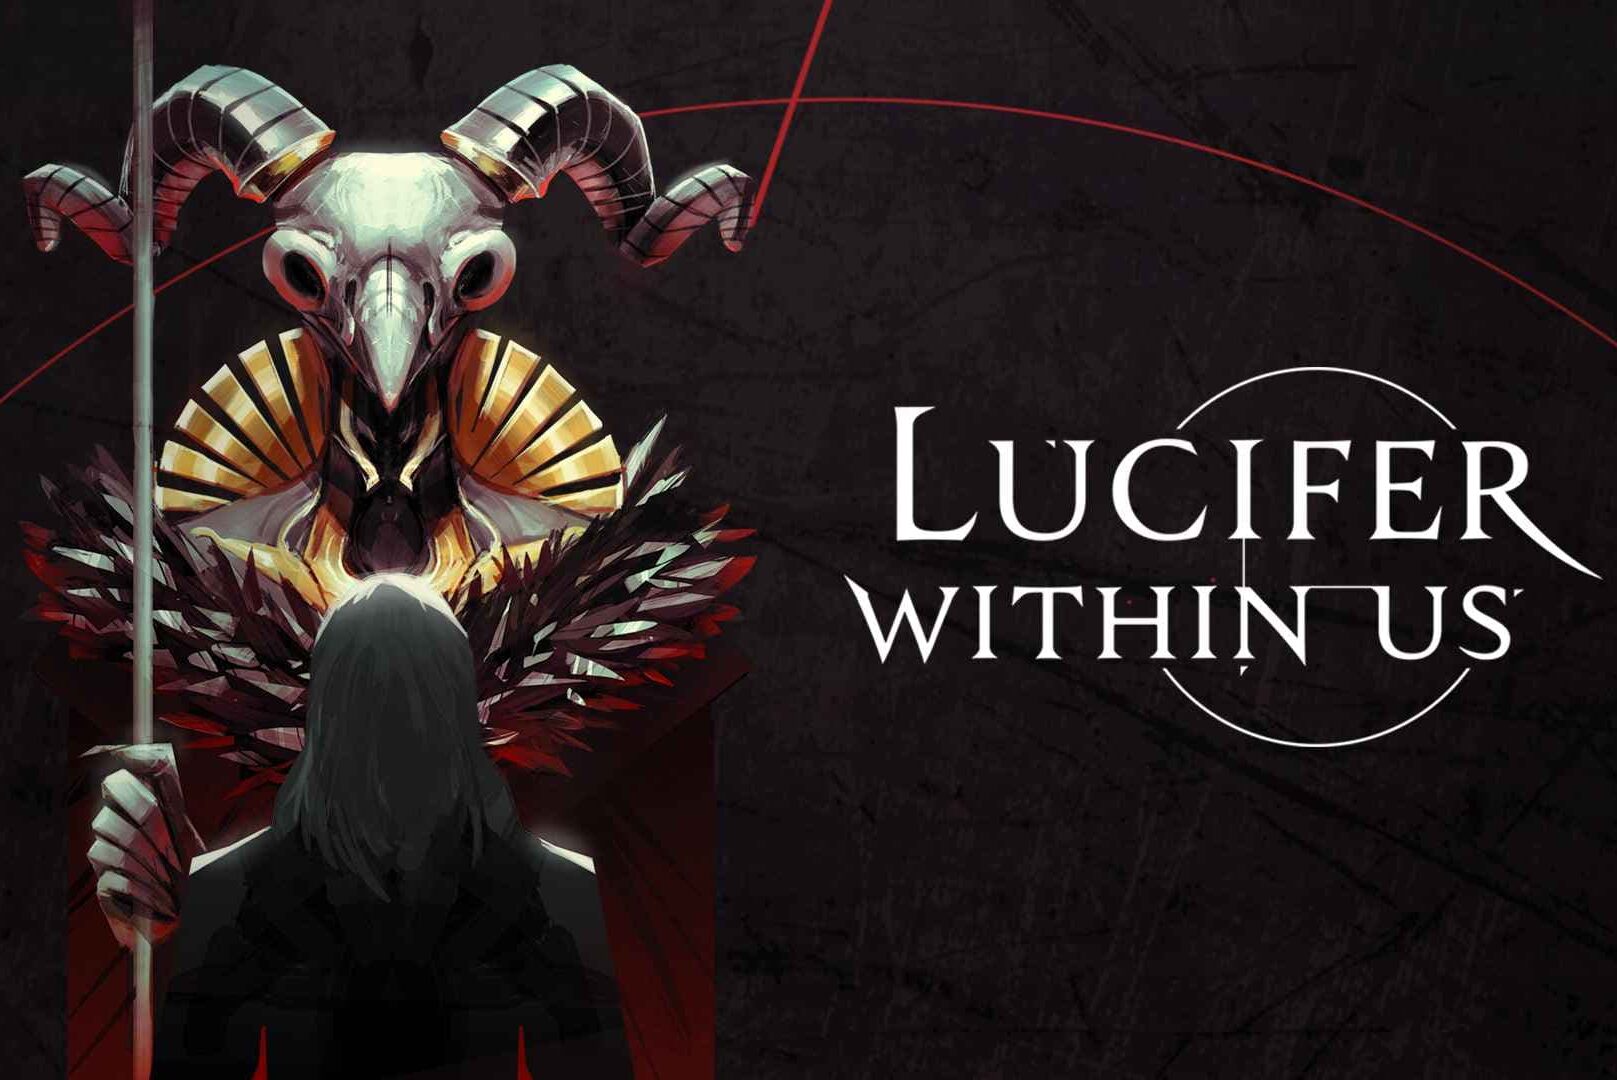 A demon faces a woman with the text "lucifer within us"